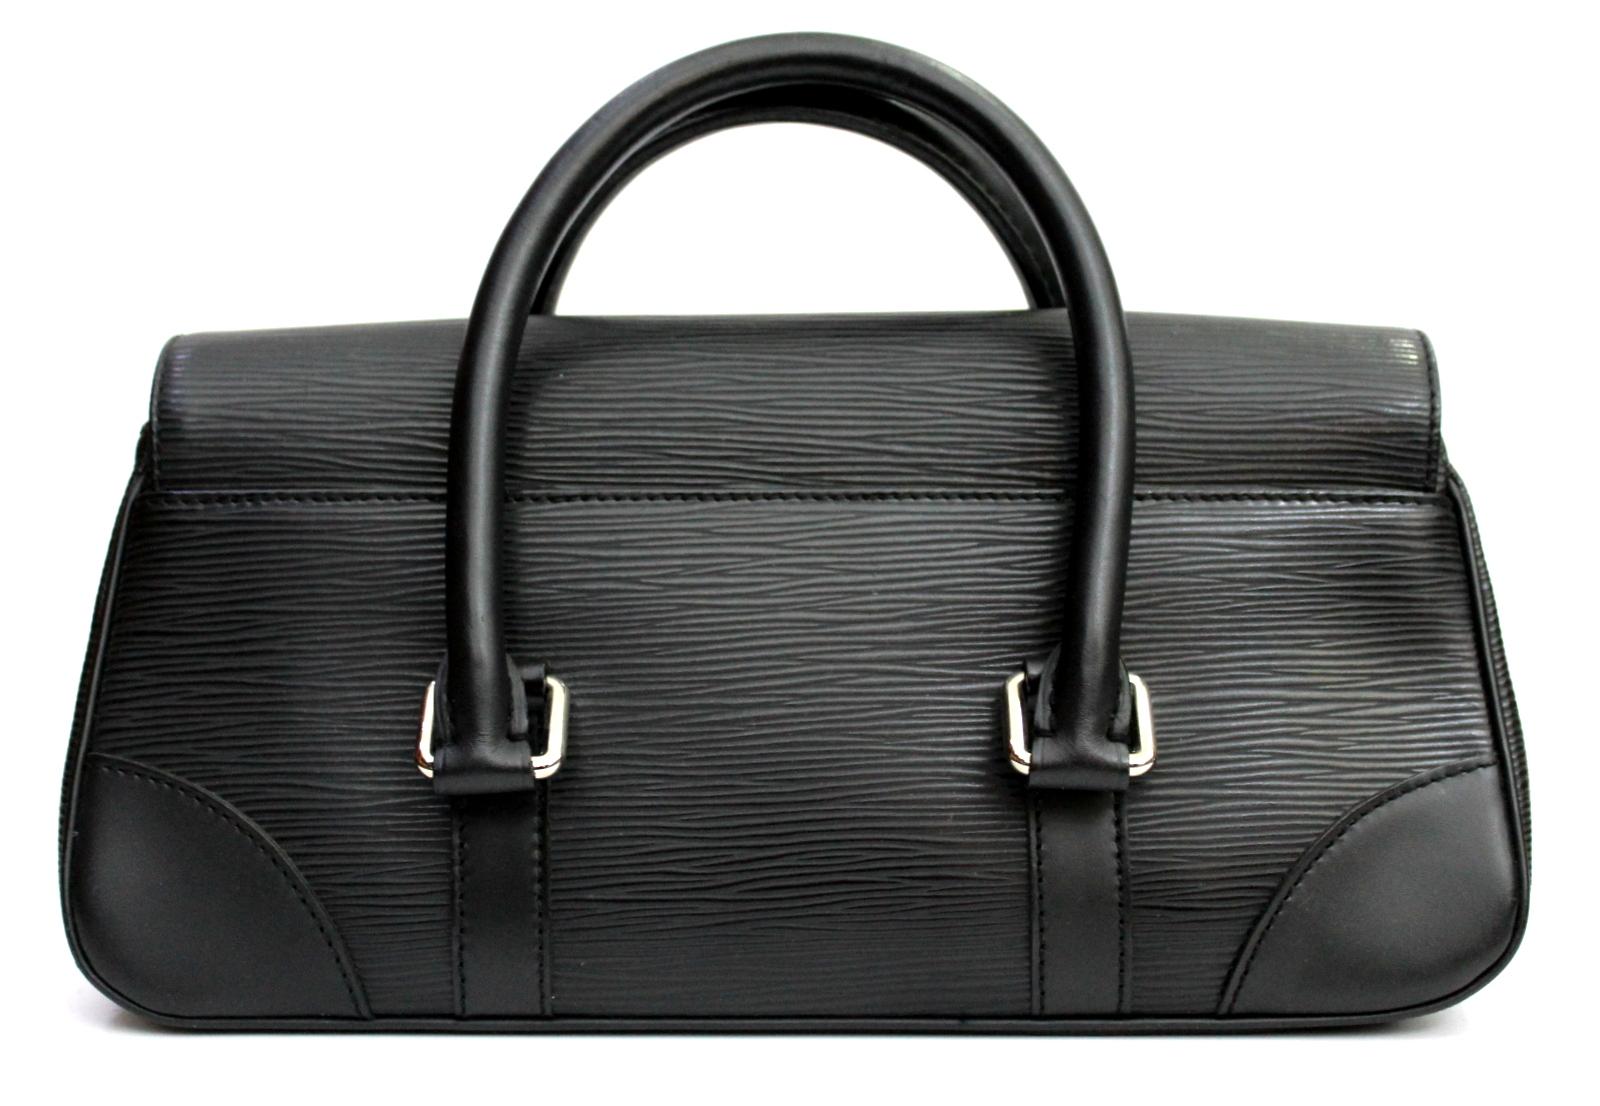 The Louis Vuitton Segur PM black bag is made of durable Epi leather with a magnificent silver metal lock that ensures the flap is closed. This size PM is the smallest size of the Segur family, which has two rigid handles and a back pocket. A